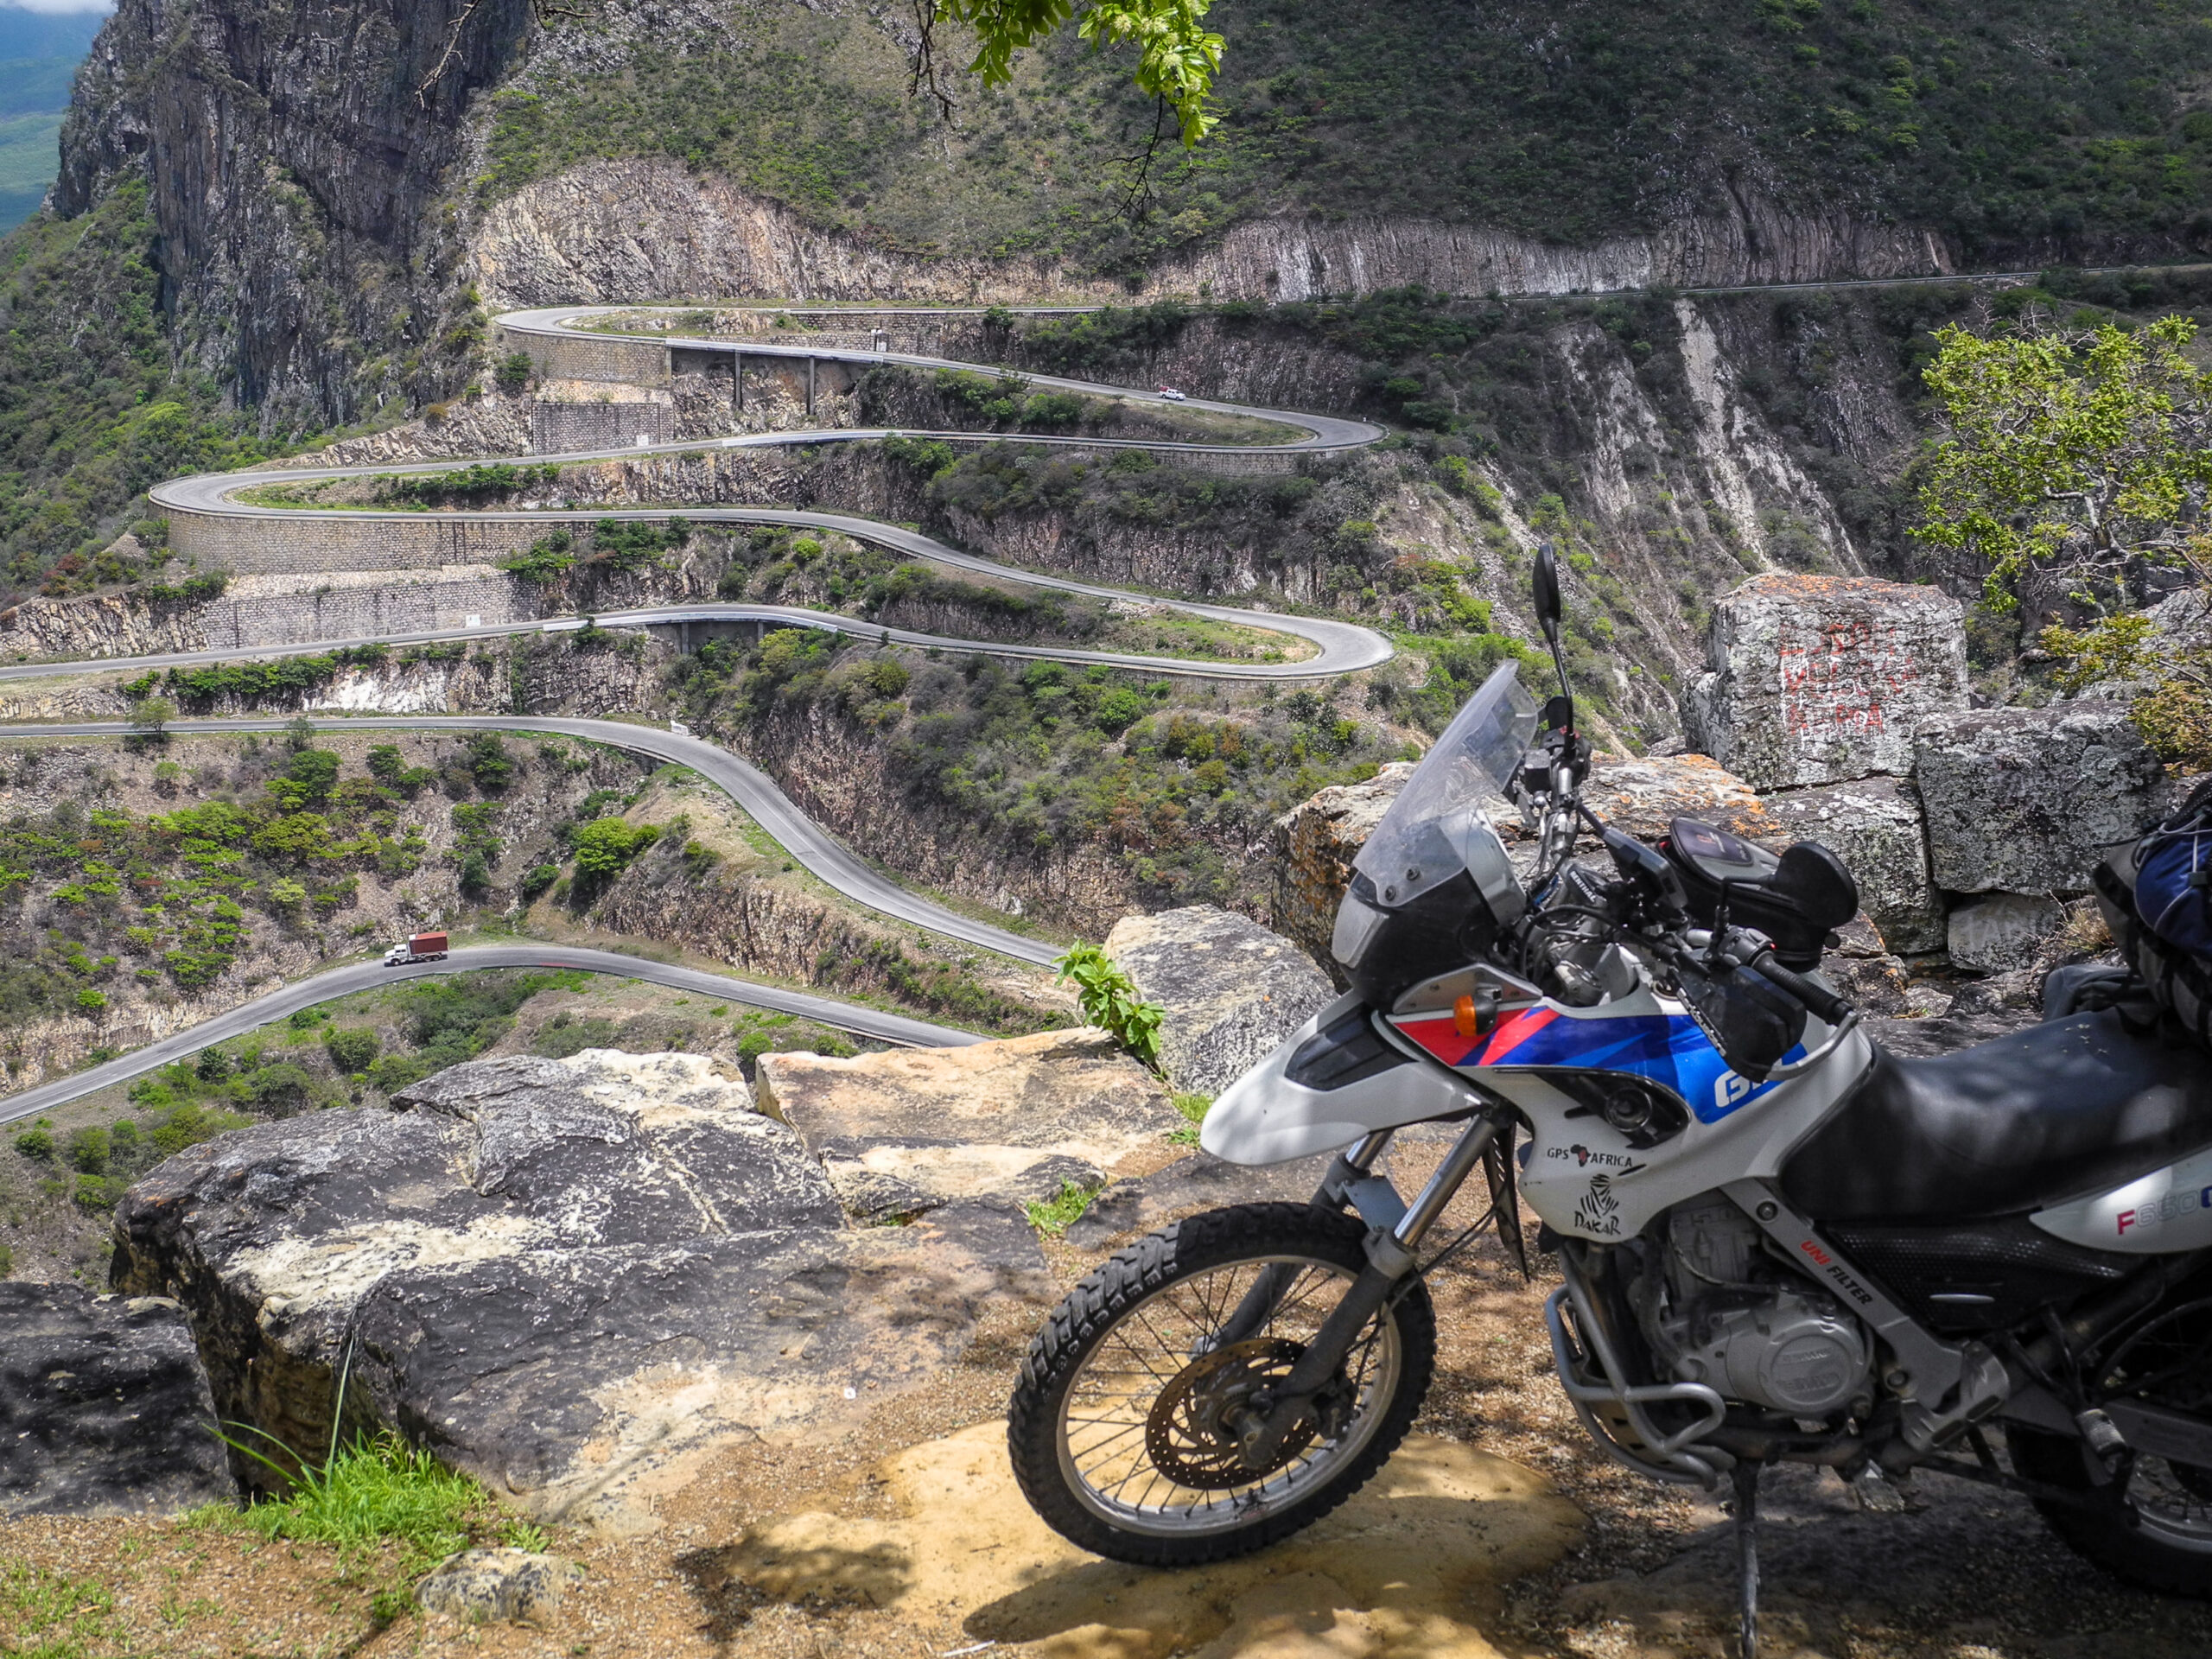 Leba Pass Angola. One of the best passes to ride on an Adventure motorcycle.